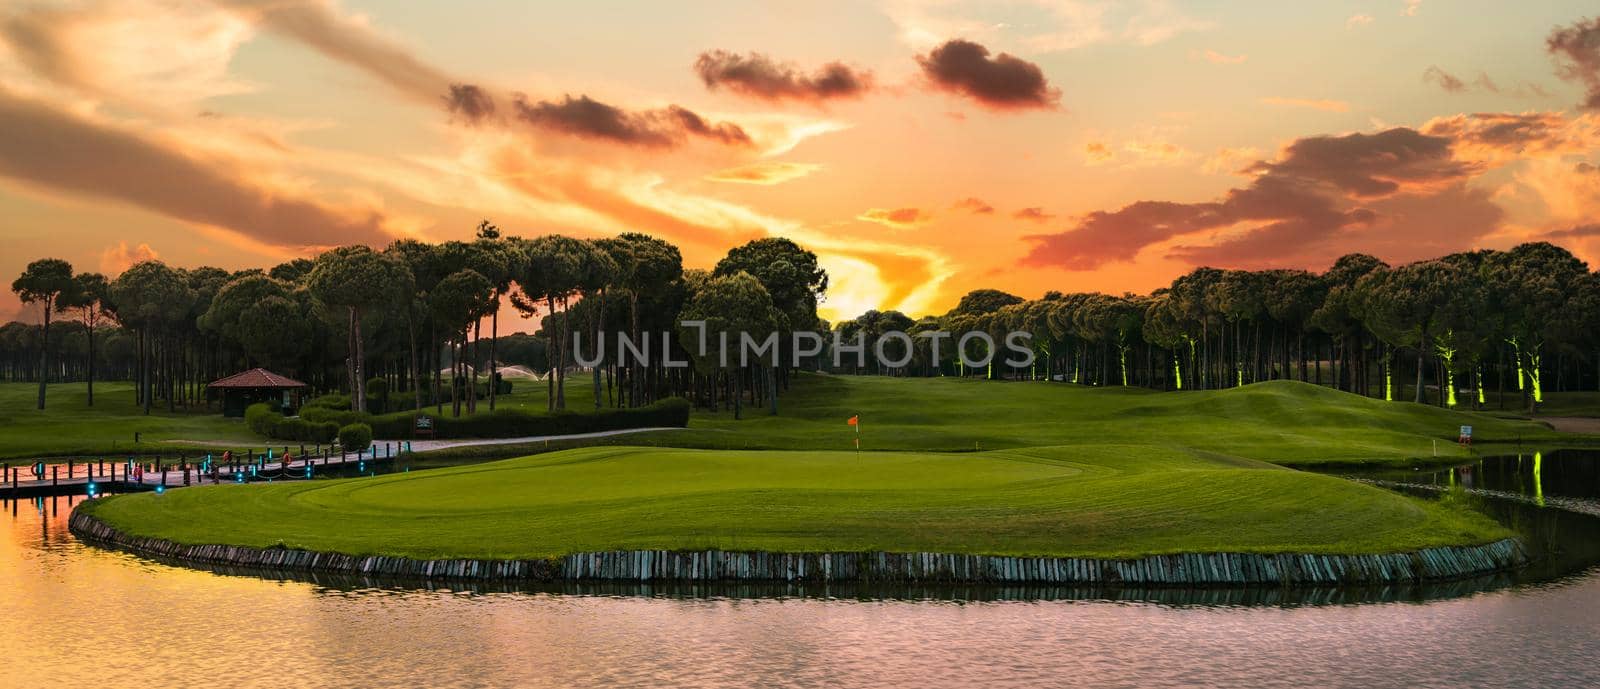 Panoramic view of beautifPanoramic view of beautiful golf course with pines at sunset. Golf field with fairway, lake and pines